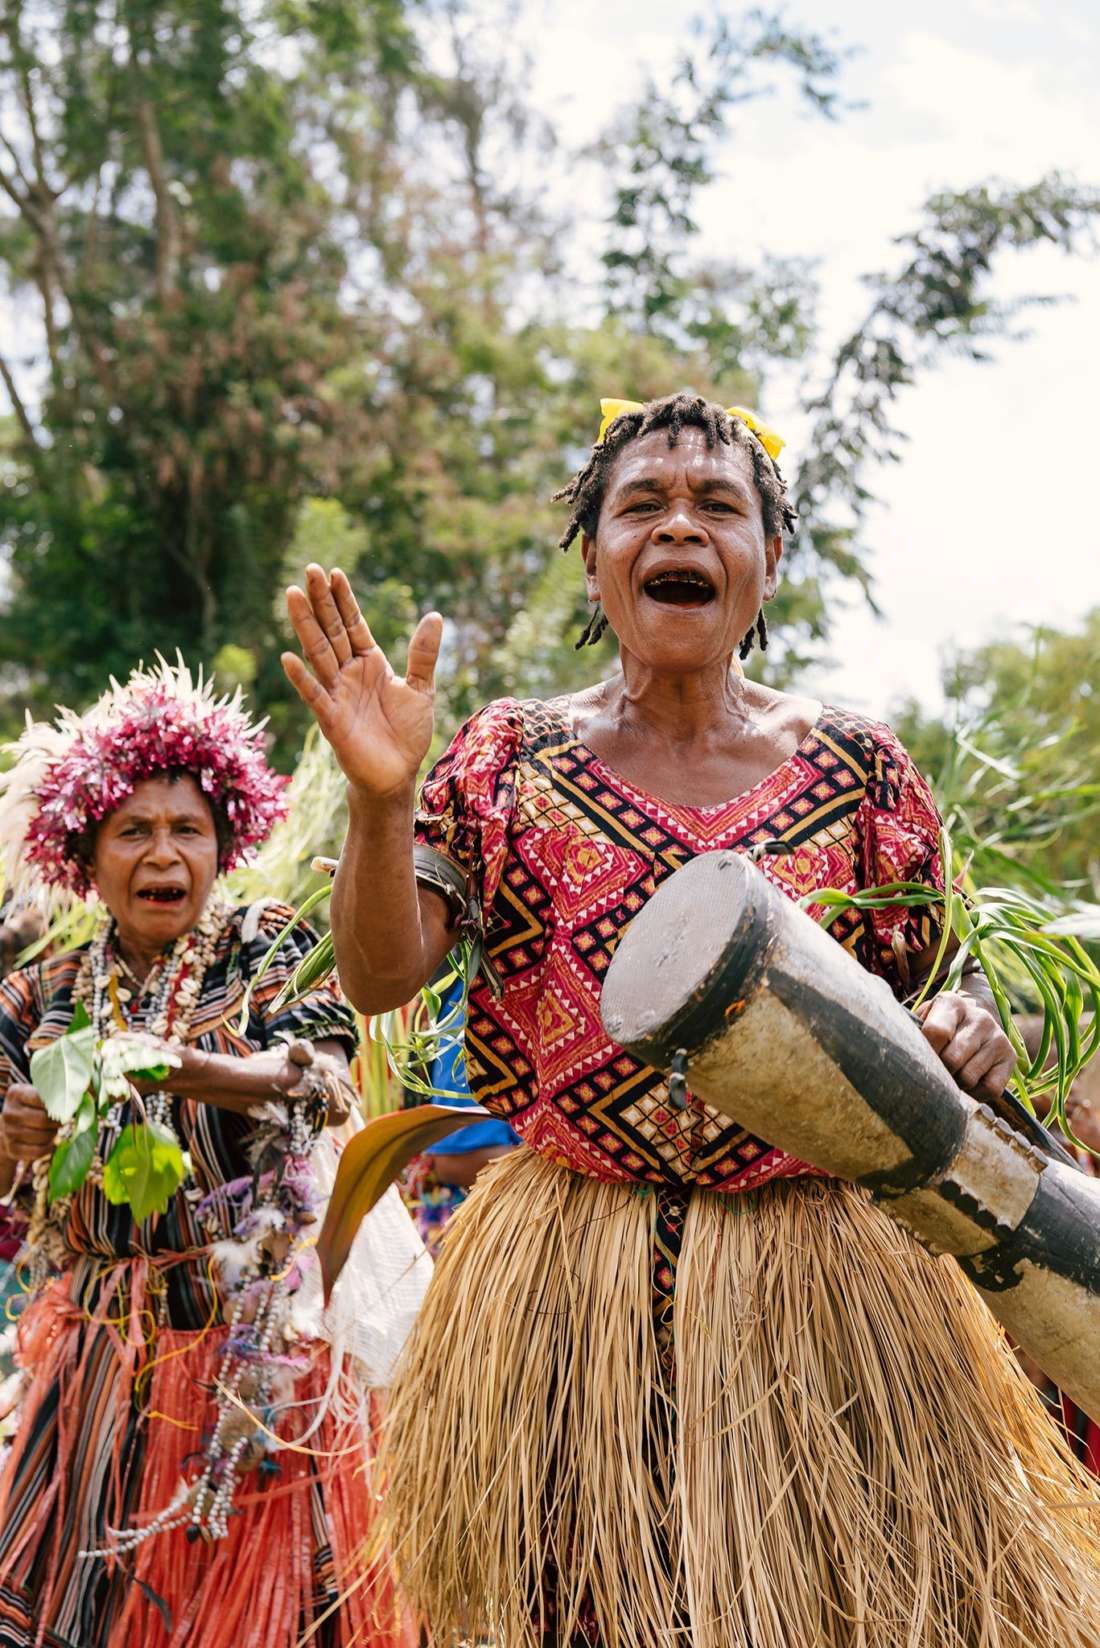 Changing the narrative of Papua New Guinea